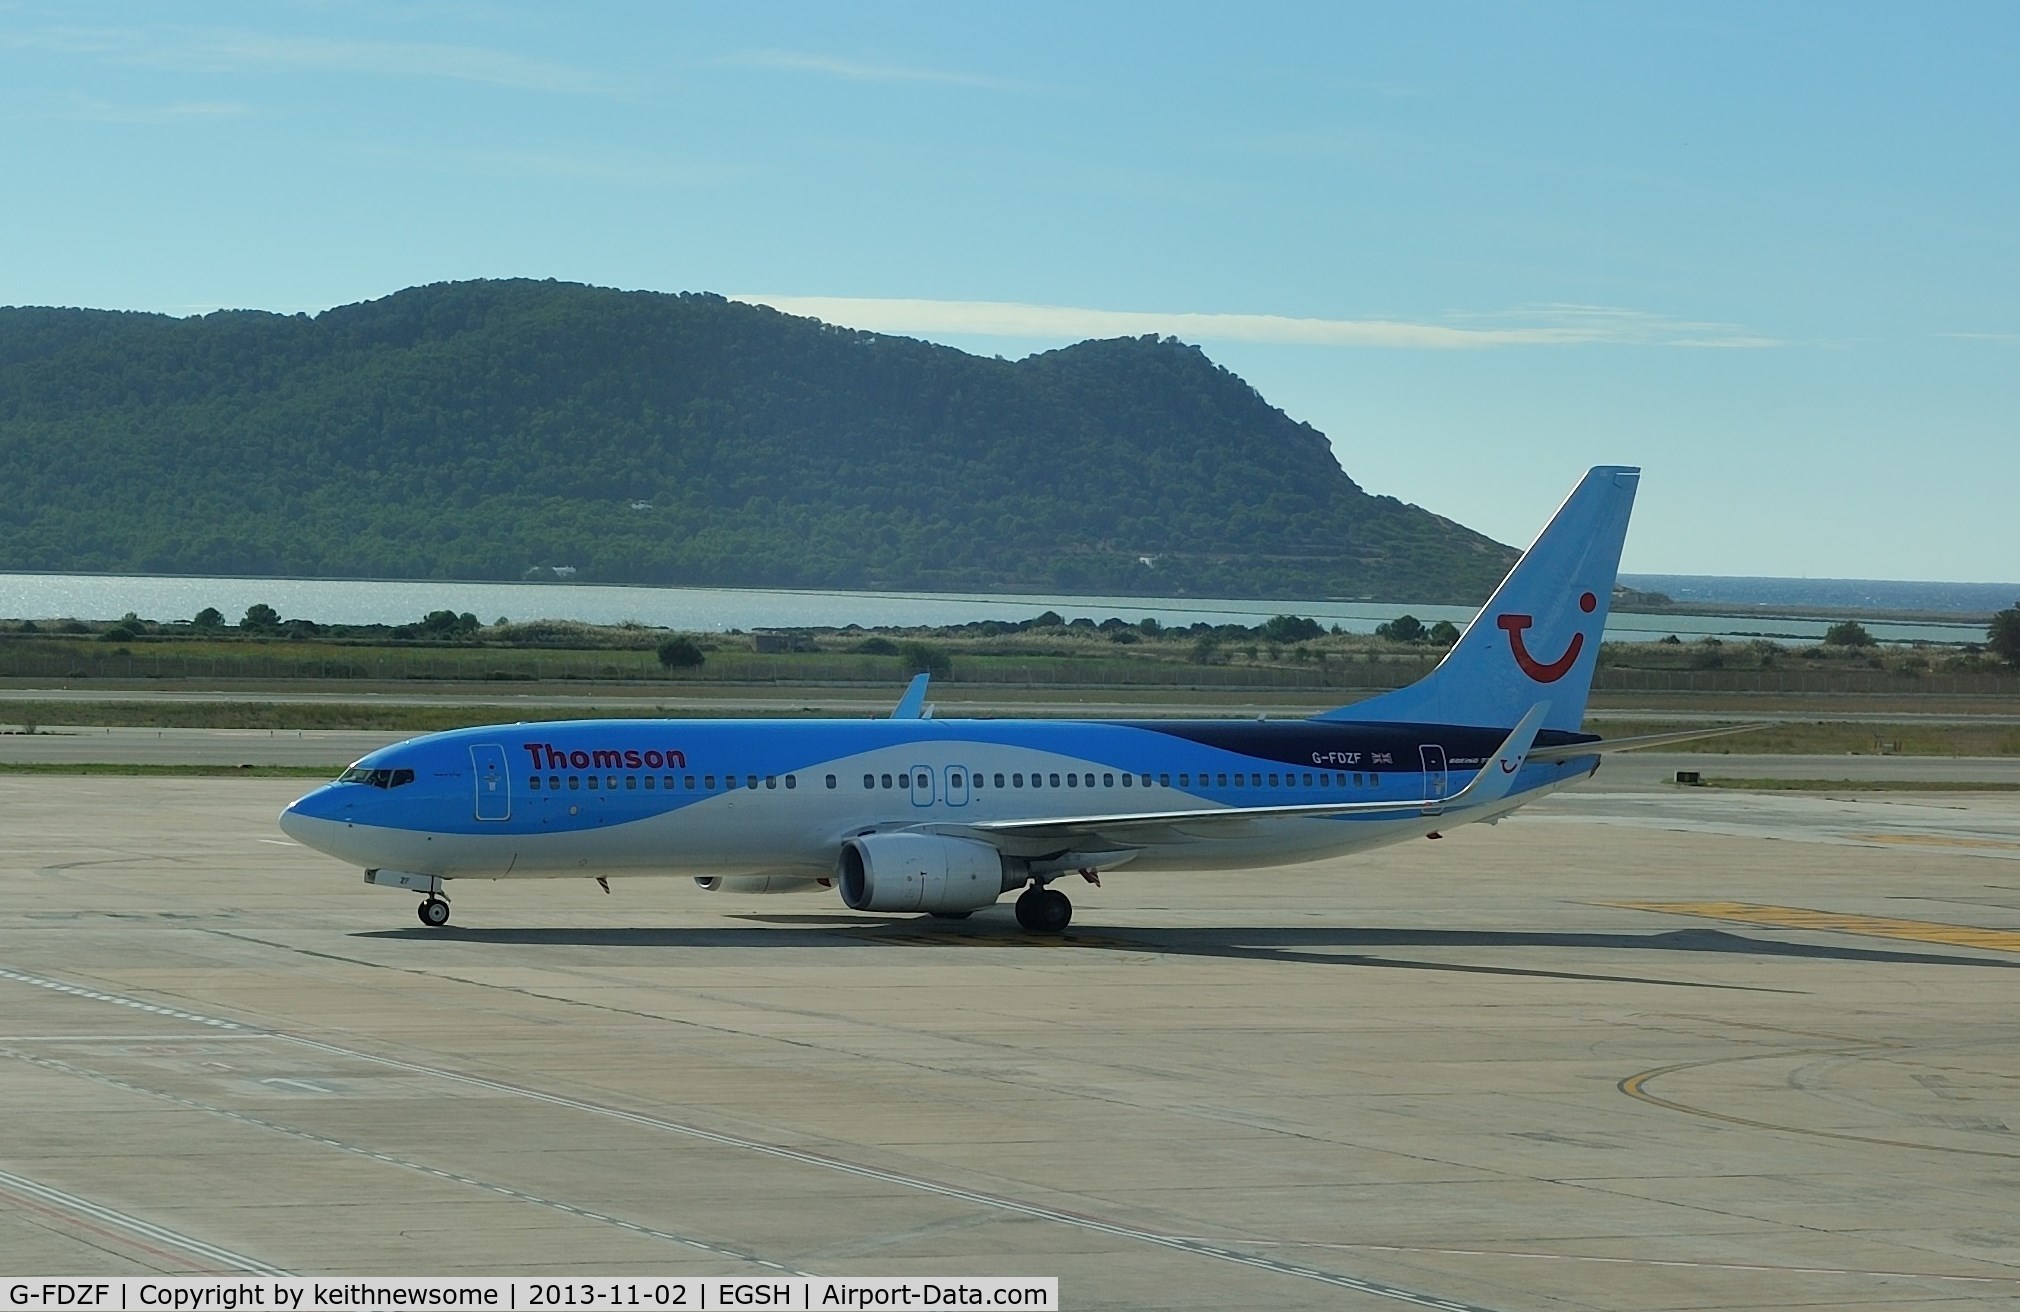 G-FDZF, 2008 Boeing 737-8K5 C/N 35138, Seen arriving at Ibiza to collect the final return party to Norwich of 2013 !